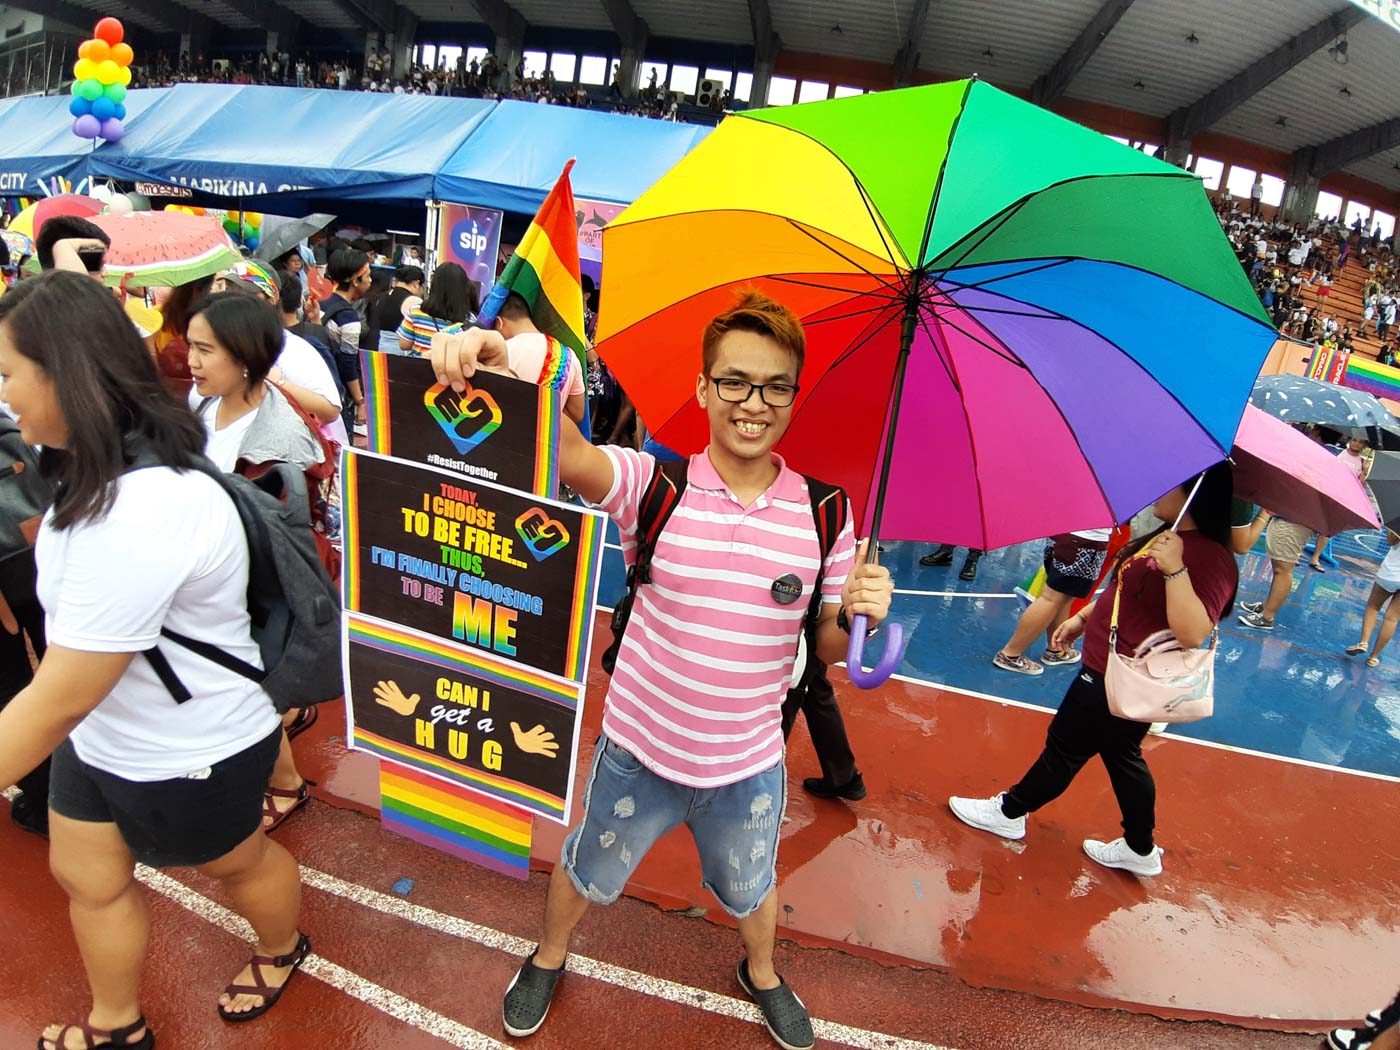 Despite rain, thousands march for equality in Manila’s Pride parade